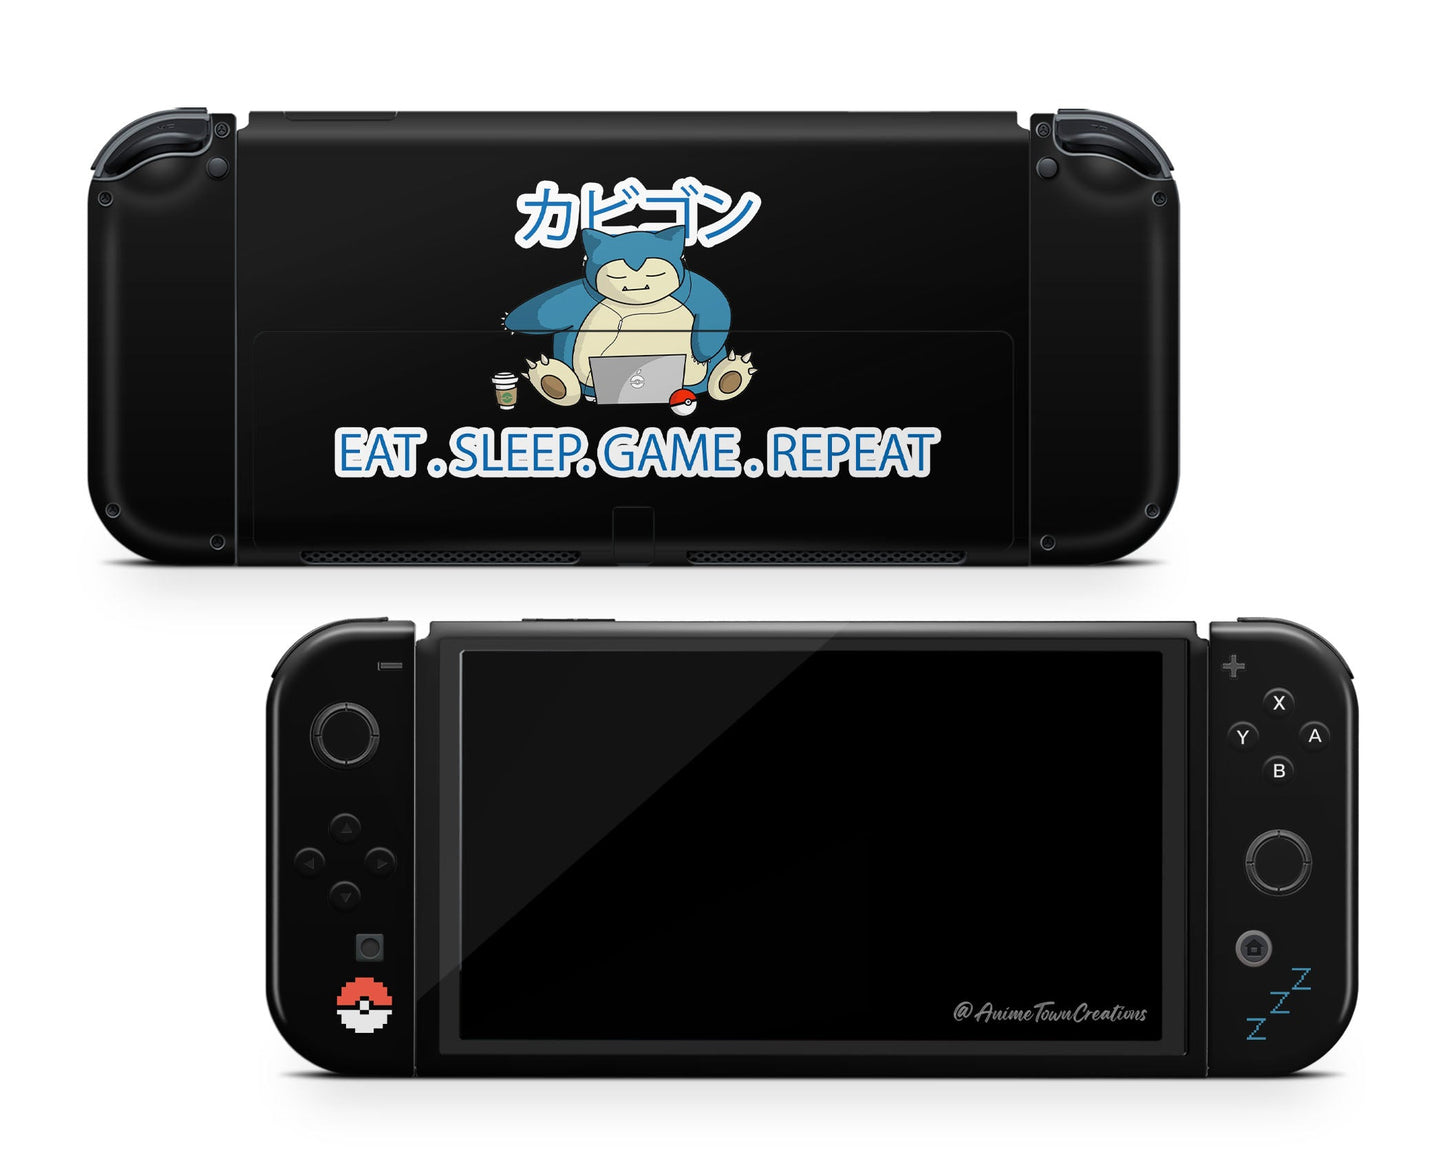 Anime Town Creations Nintendo Switch OLED Snorlax Eat Sleep Game Repeat Vinyl only Skins - Anime Pokemon Switch OLED Skin